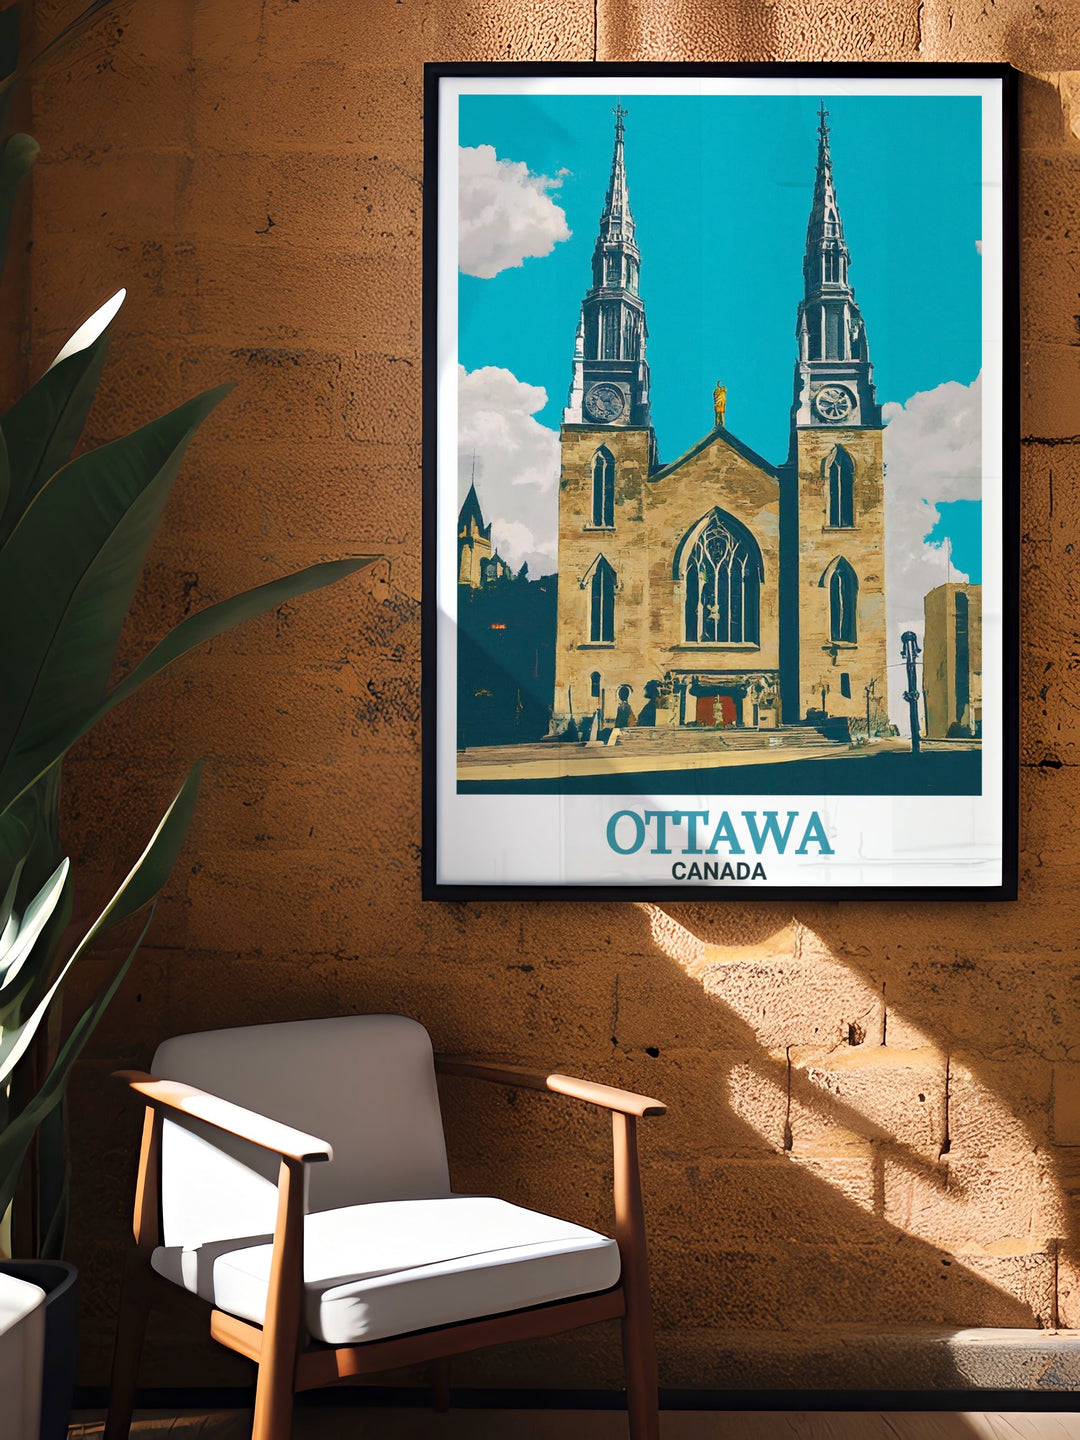 Notre Dame Cathedral Basilica prints perfect for home décor and travel enthusiasts. These prints showcase the cathedrals grandeur and Ottawas cultural significance, making them ideal for adding a touch of Canadian history to any room.